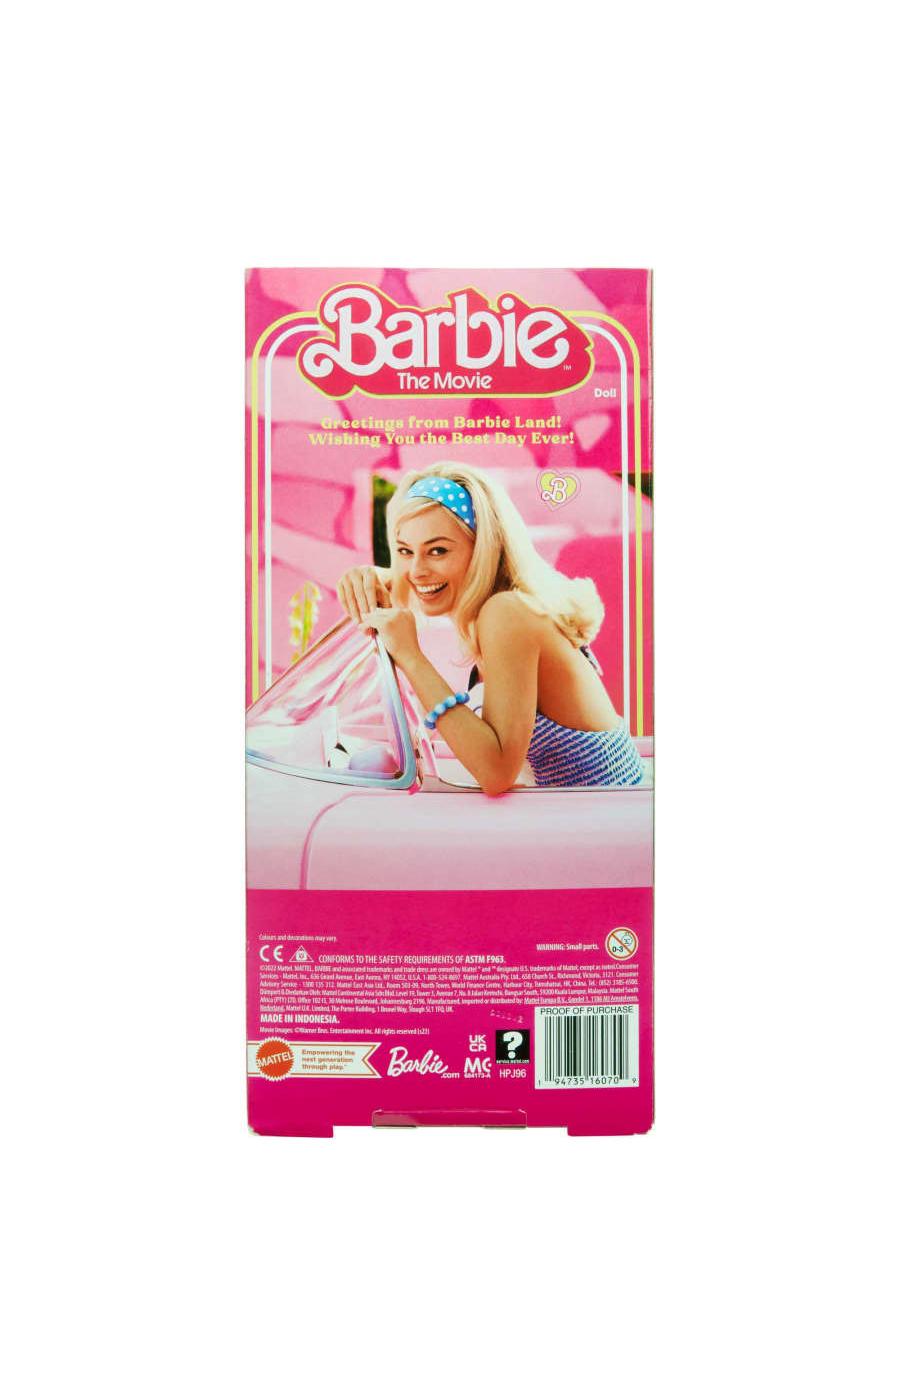 Barbie The Movie Collectible Fashion Doll in Pink Dress; image 3 of 3